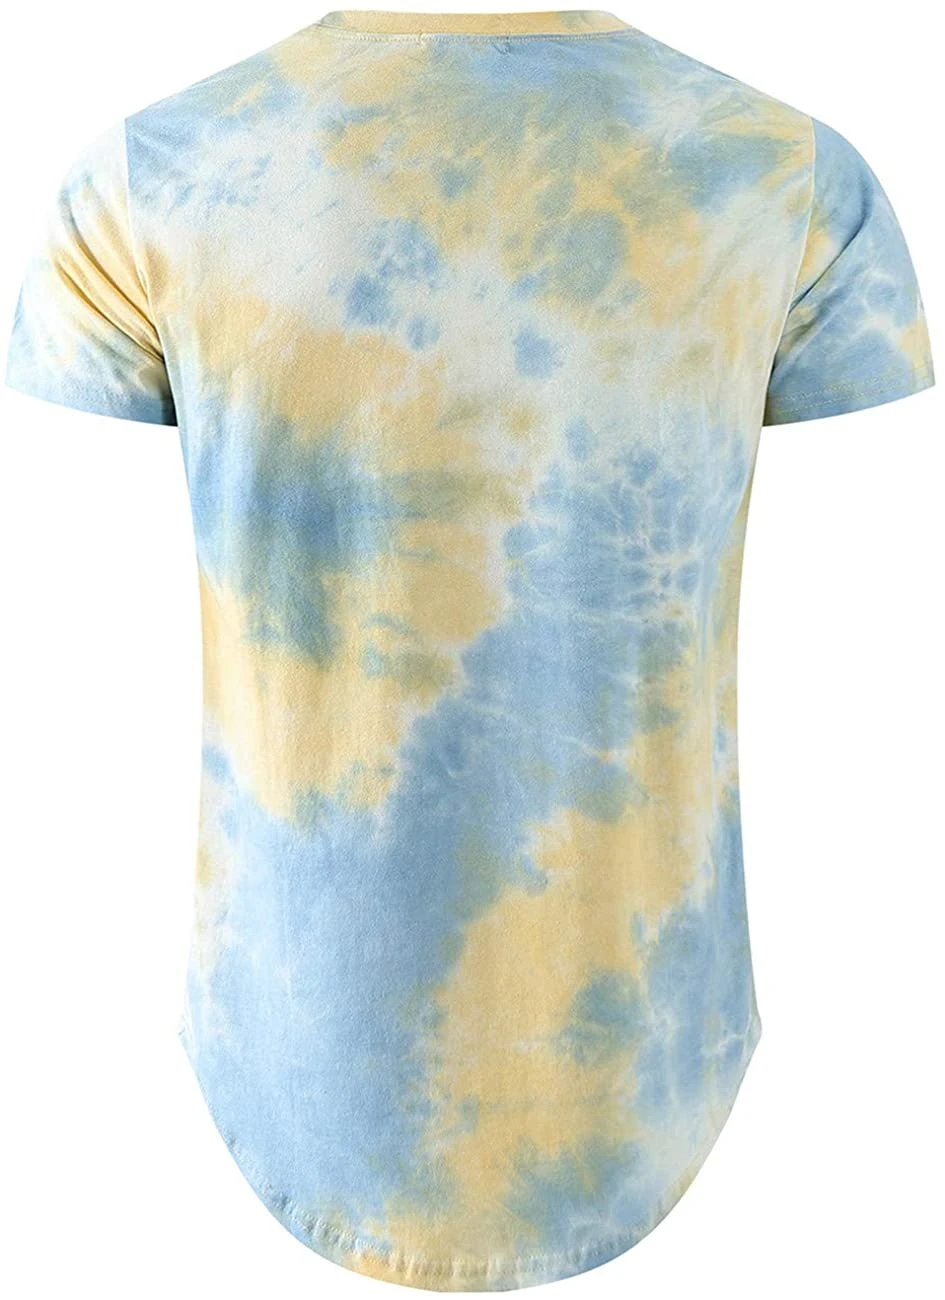 Mens Hip Hop Tee Tie-Dyed Hipster Colorful Tie-Dye T Shirts